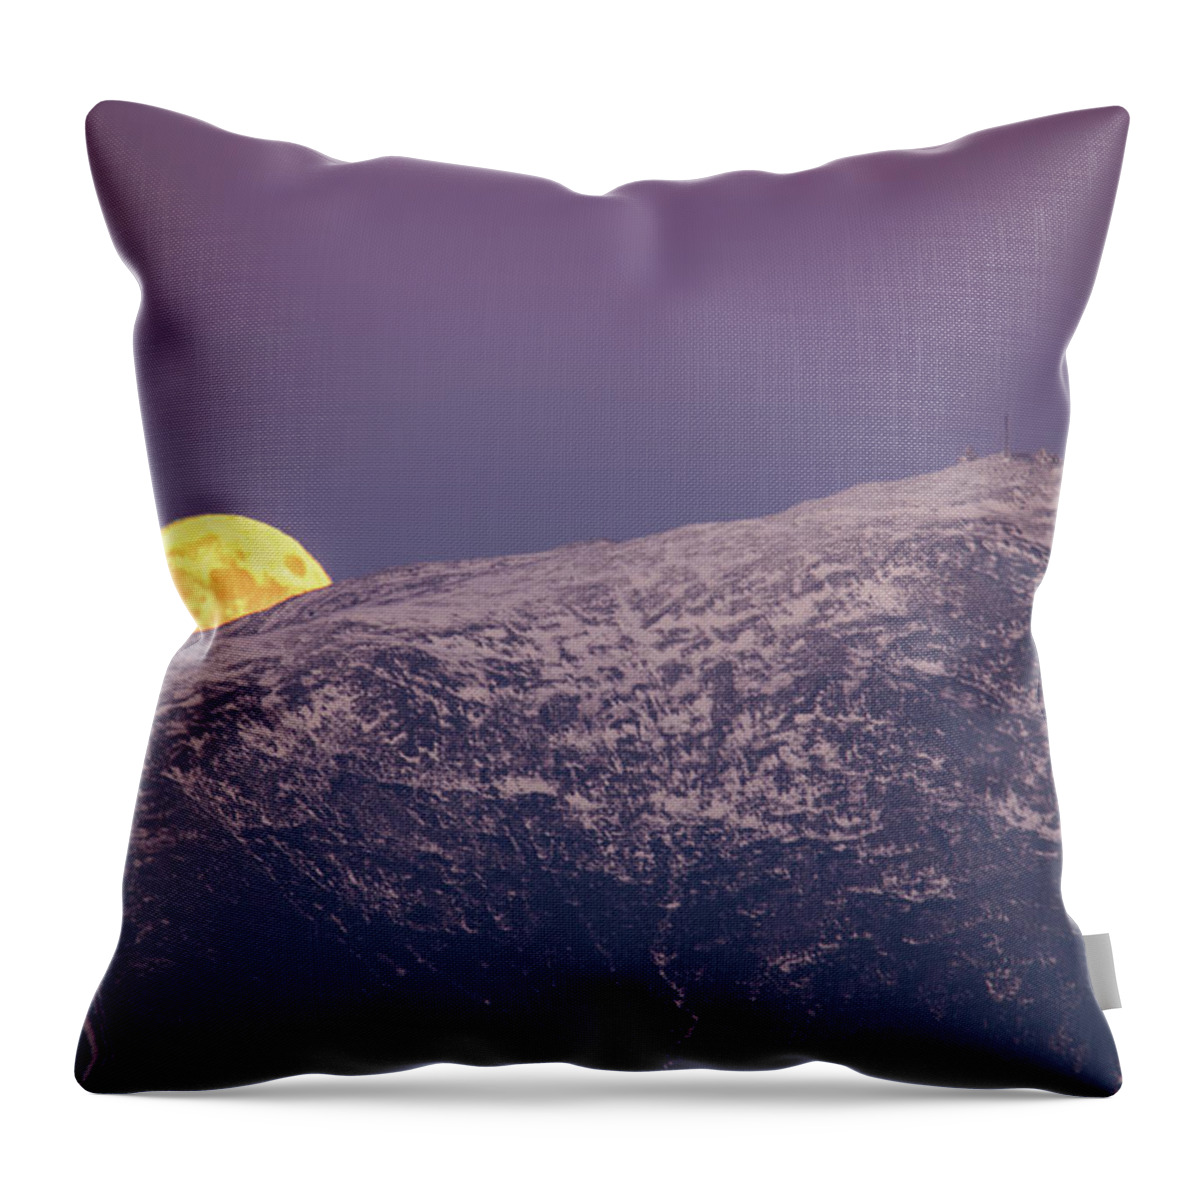 Mount Throw Pillow featuring the photograph Super Moon Rising by White Mountain Images